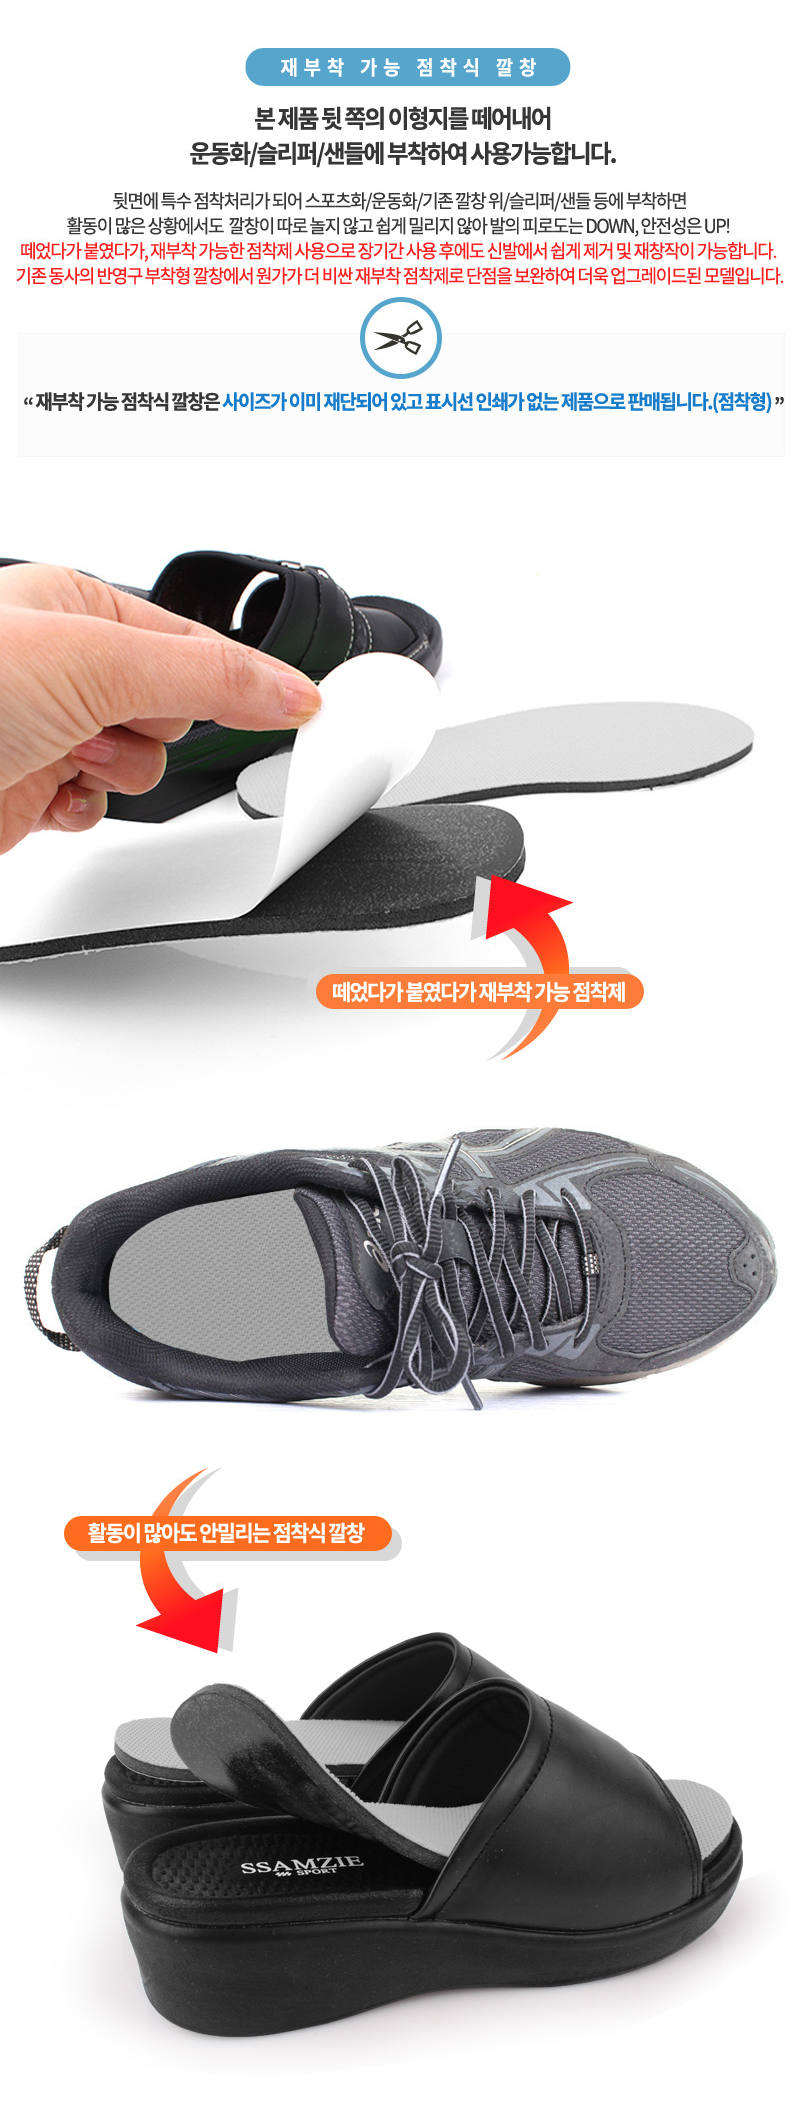 reattachable_slippers_insoles_08.jpg